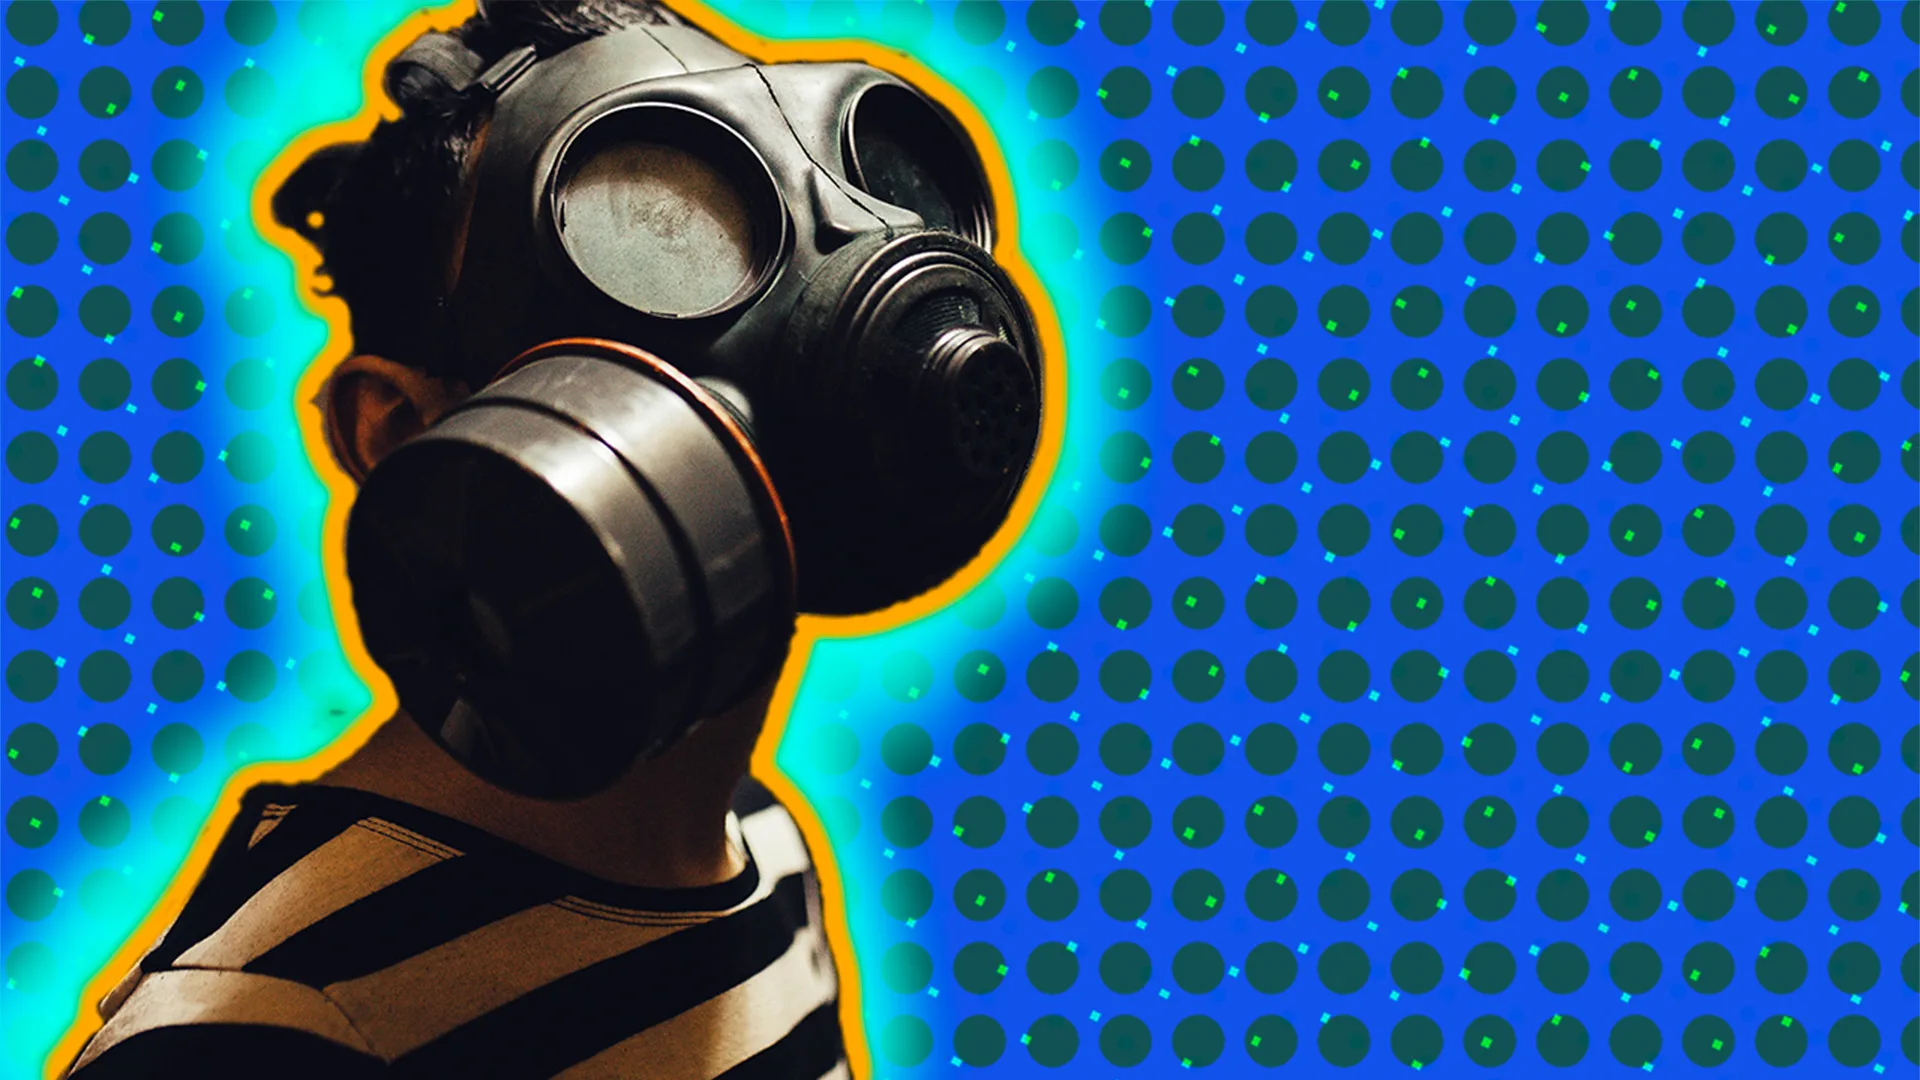 Person wearing gas mask and striped top, outlined by light blue halo effect on blue-dotted background.